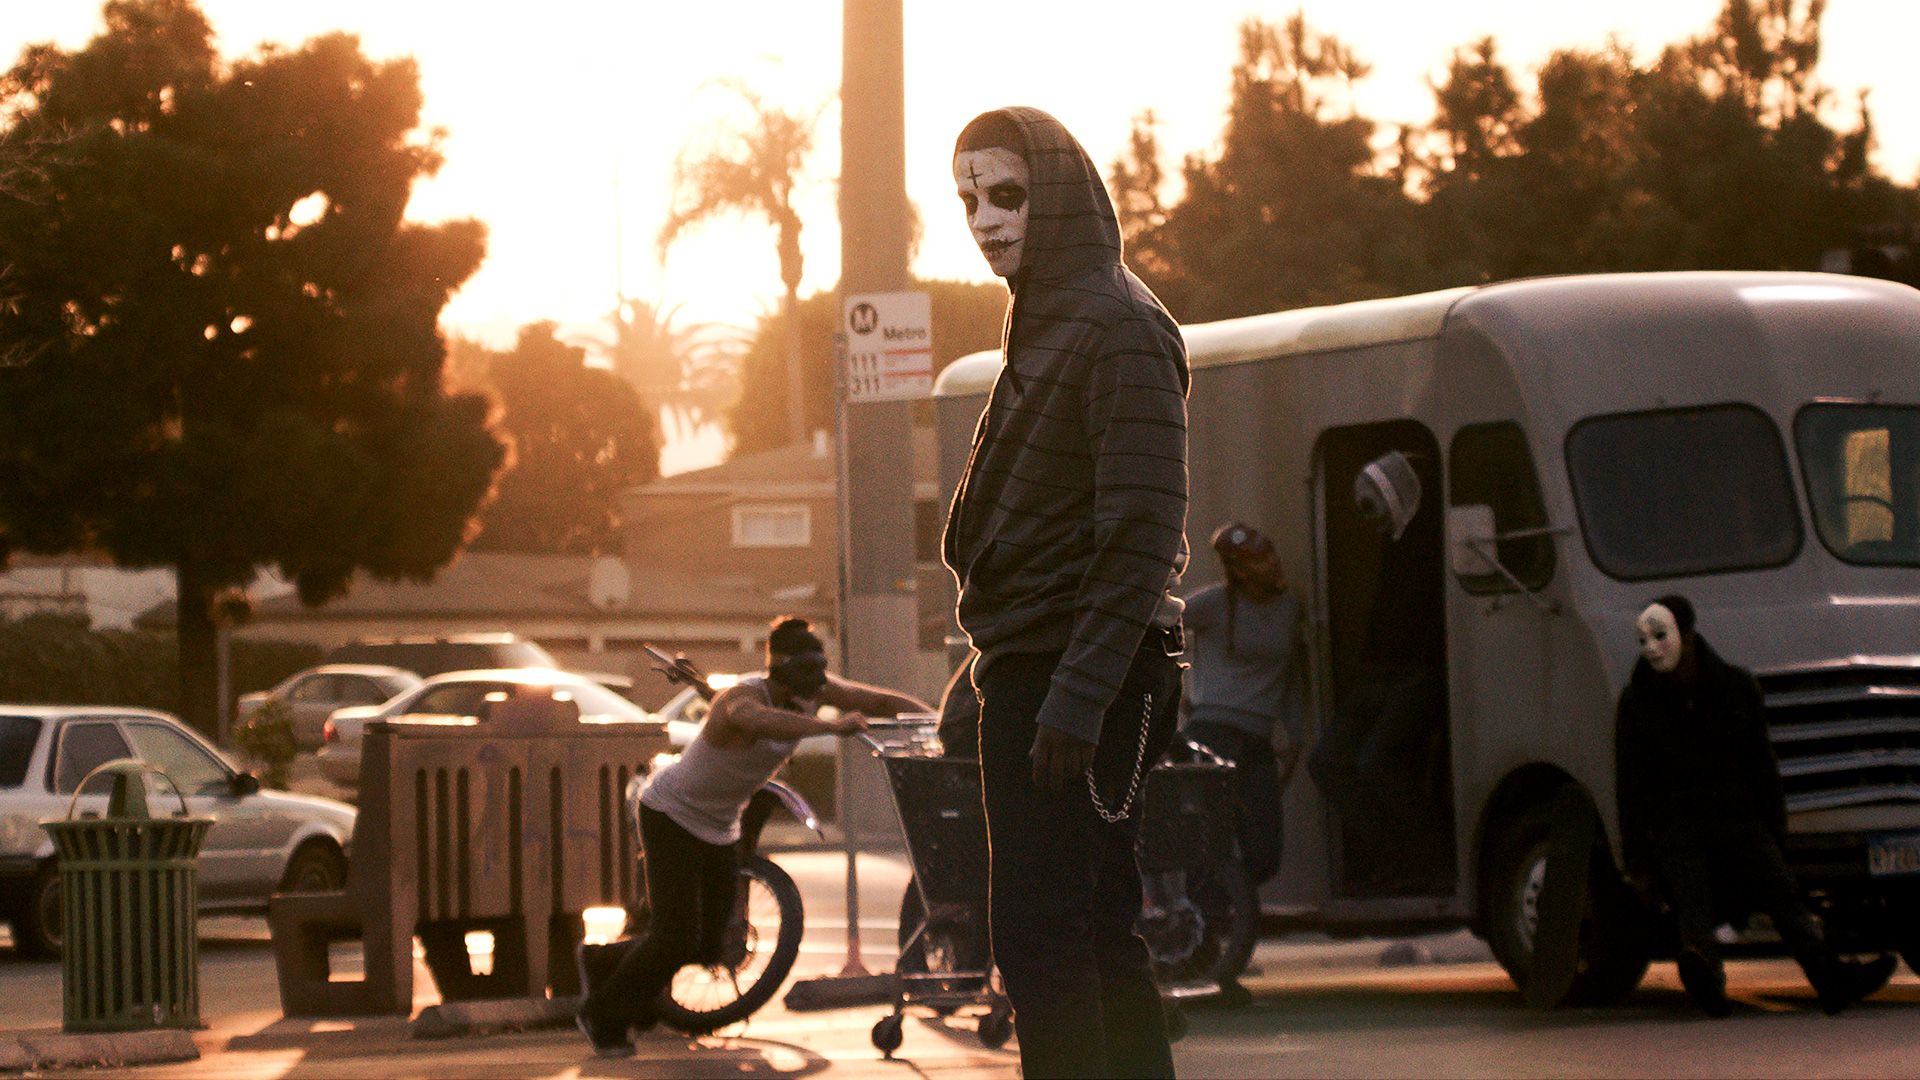 The Purge: Anarchy HD wallpapers, Desktop wallpaper - most viewed